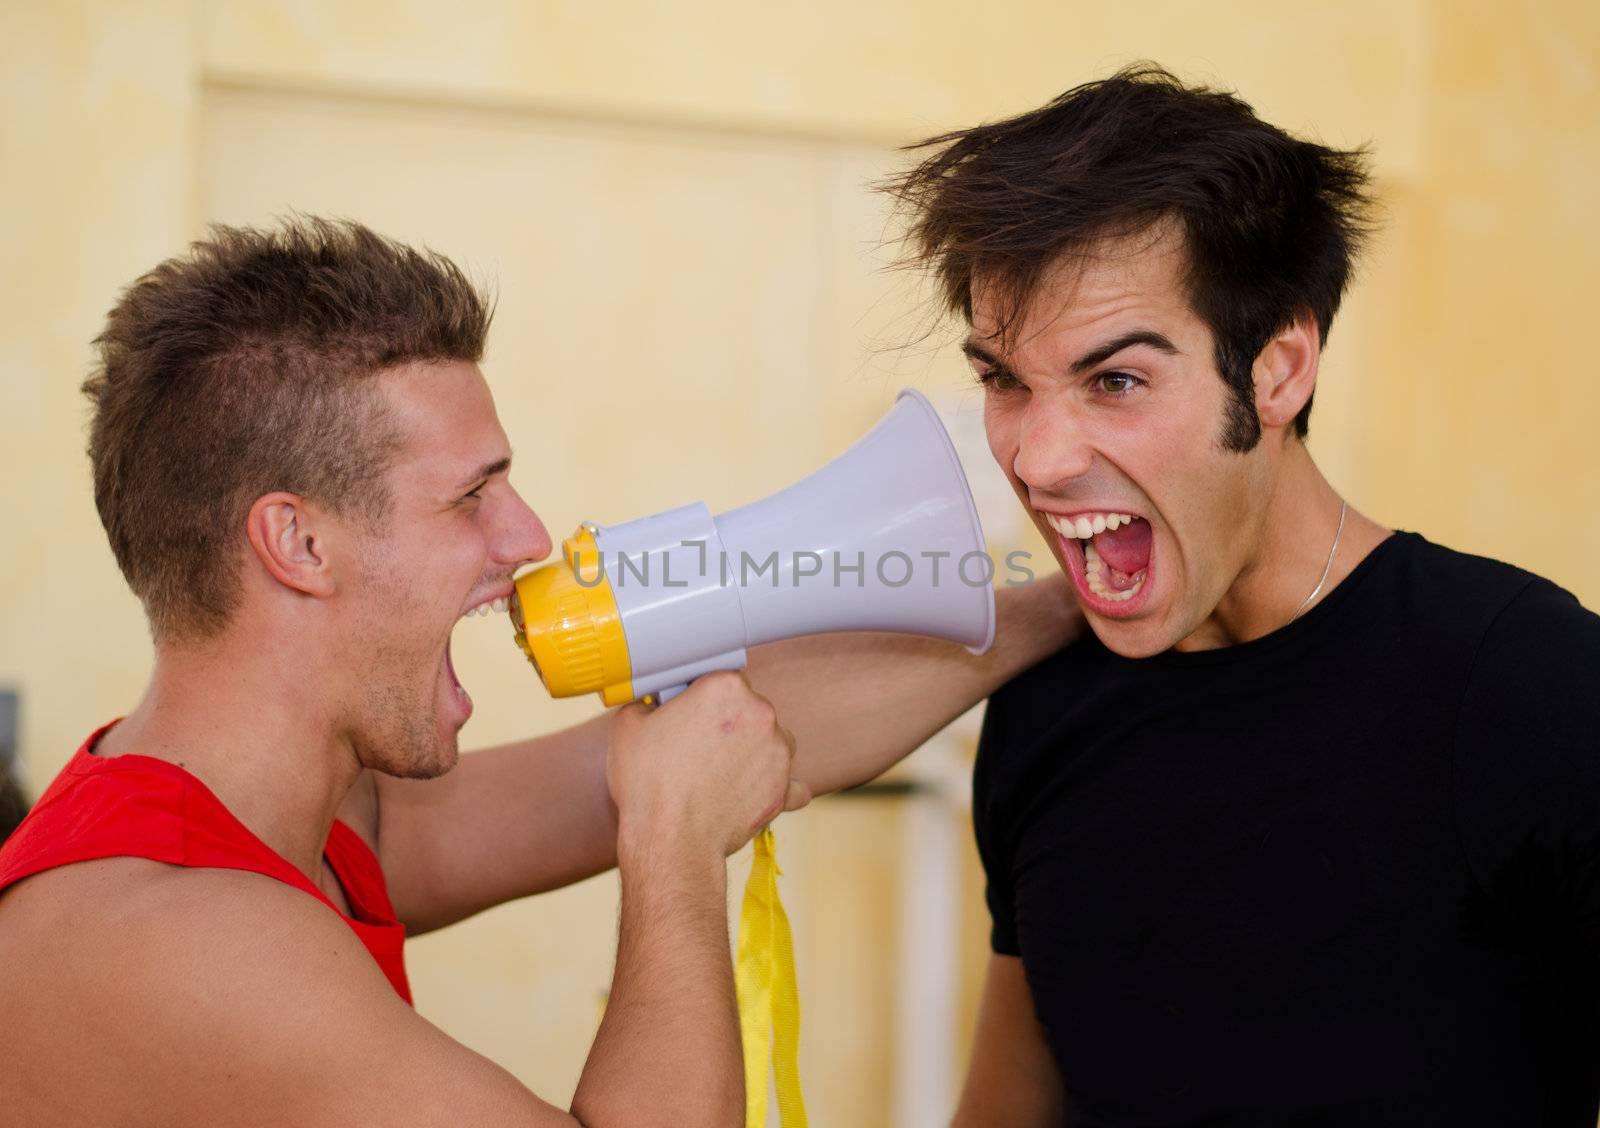 Personal trainer motivating male client by yelling against him with megaphone